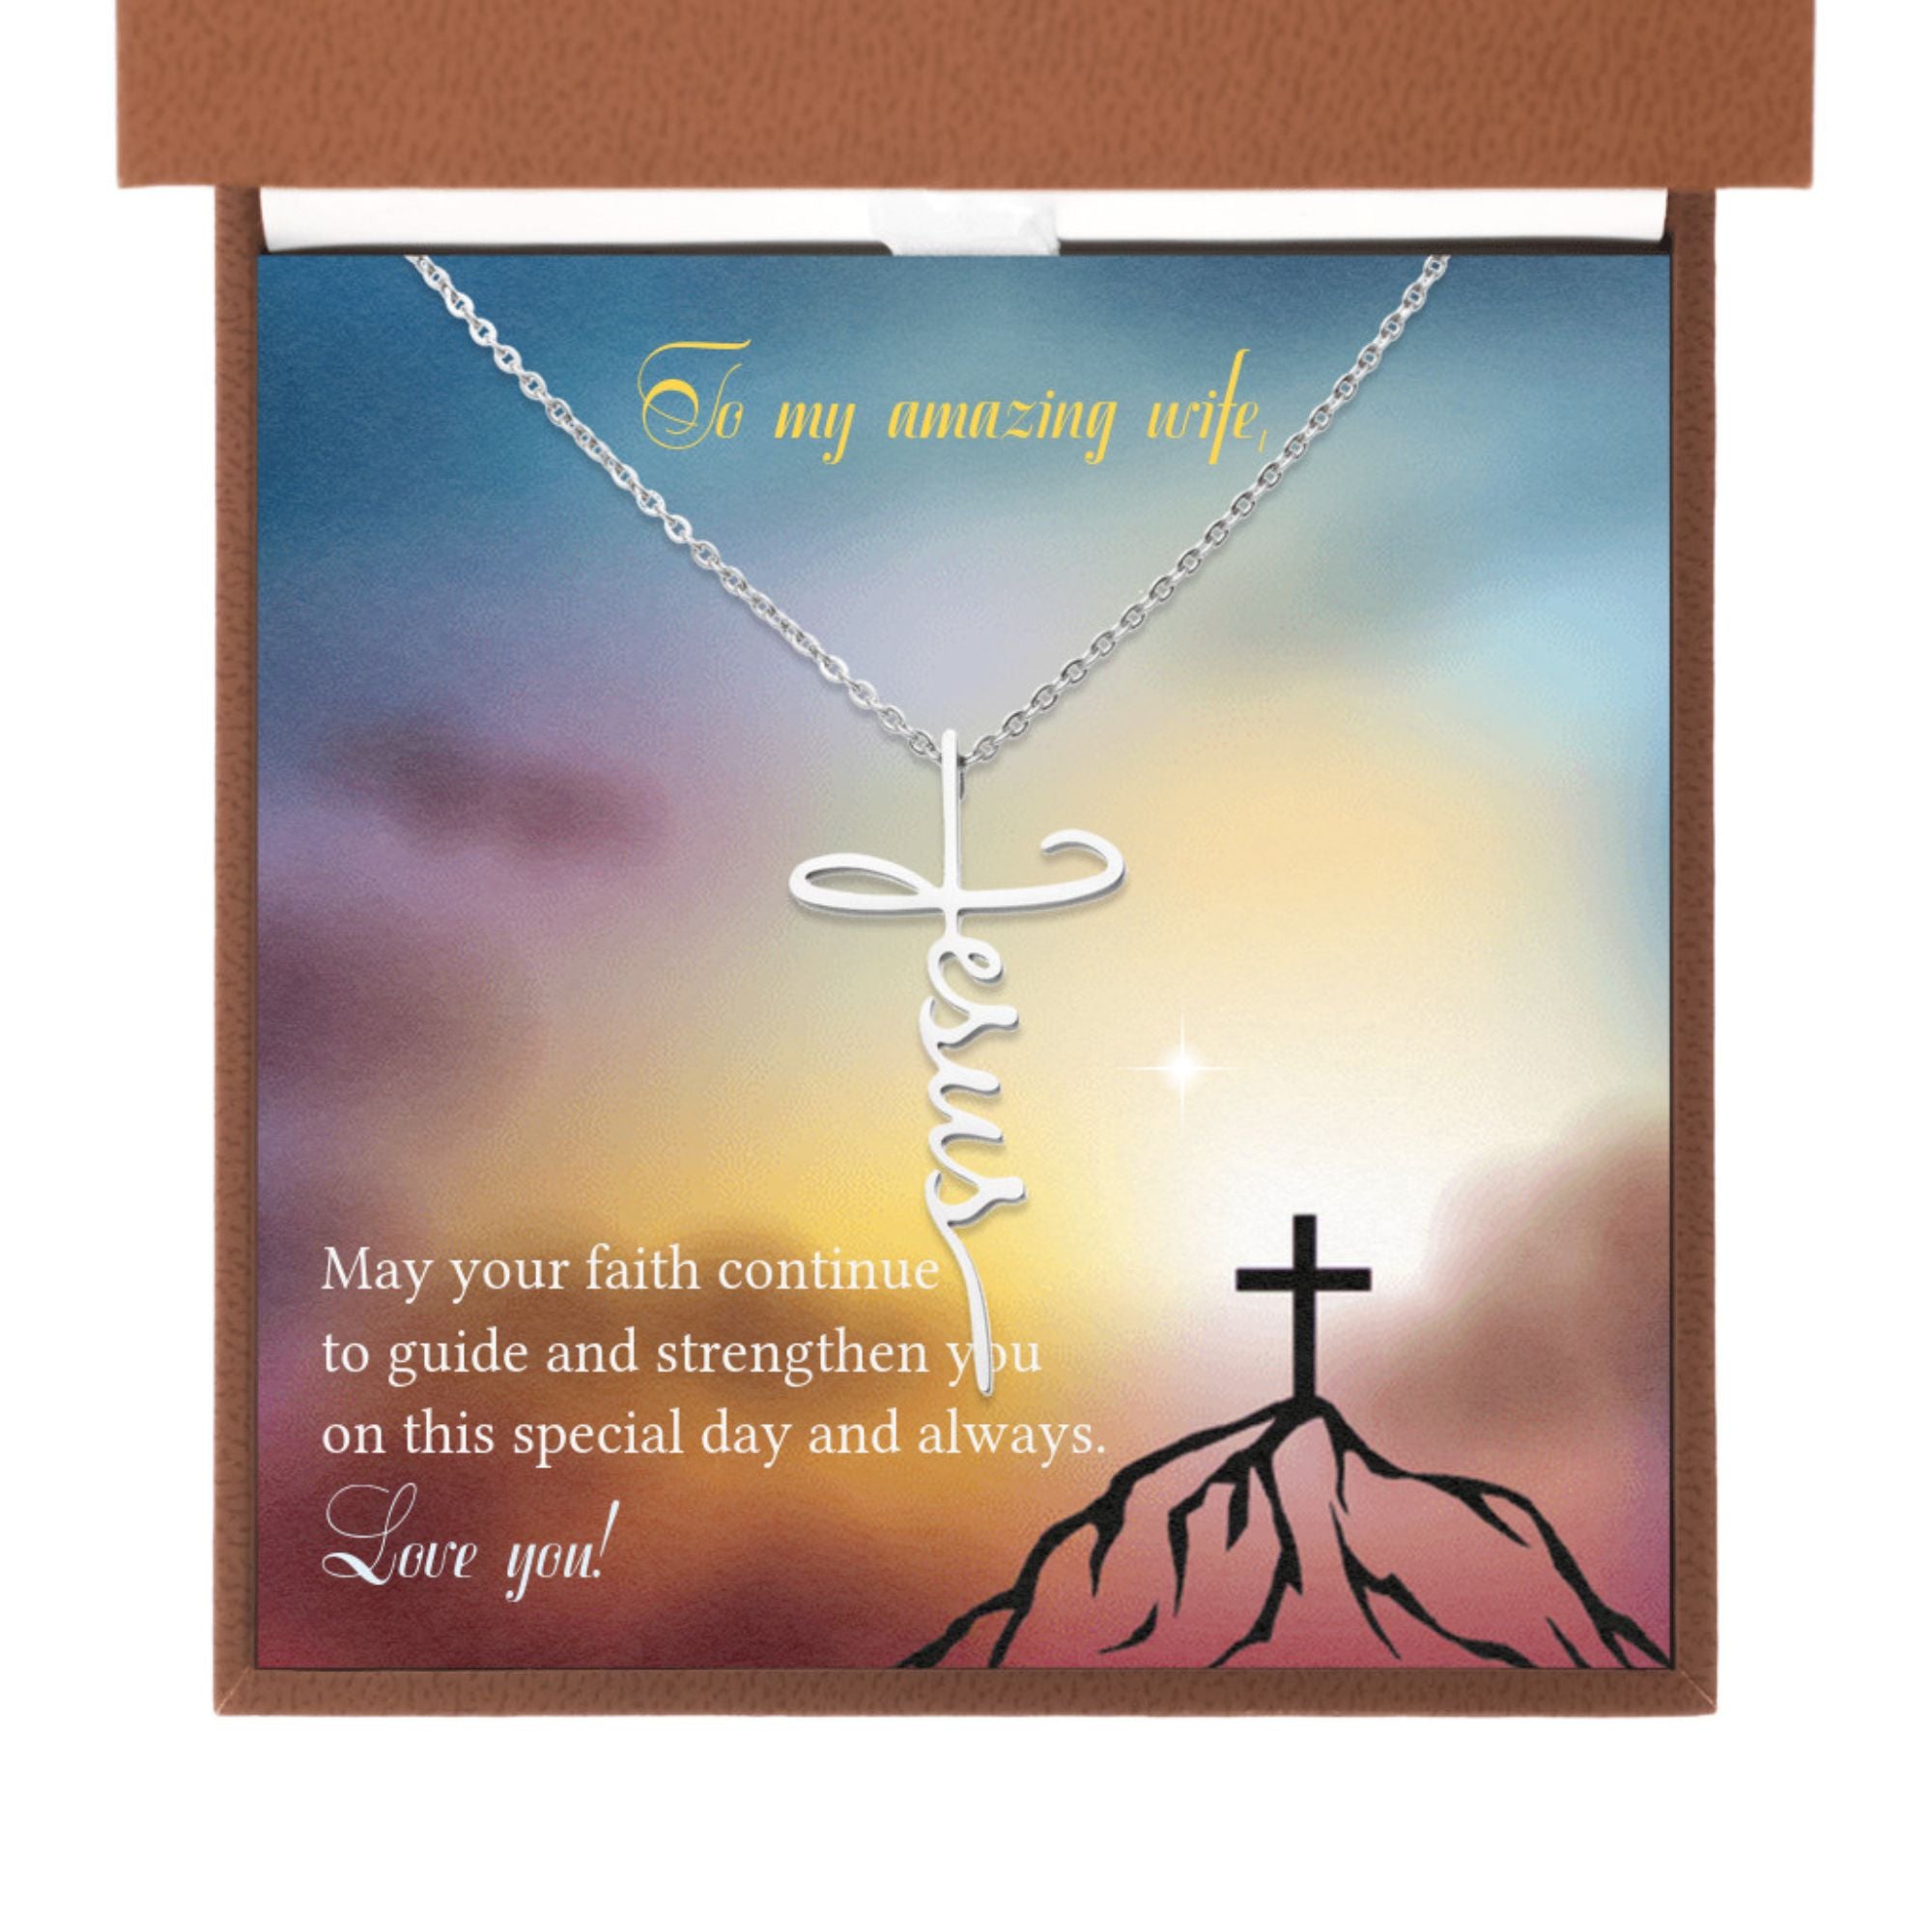 My Amazing Wife - I Am the Way - Jesus Cross Necklace Box Type: Brown Leather Box Finish: Stainless Steel Jesus Passion Apparel